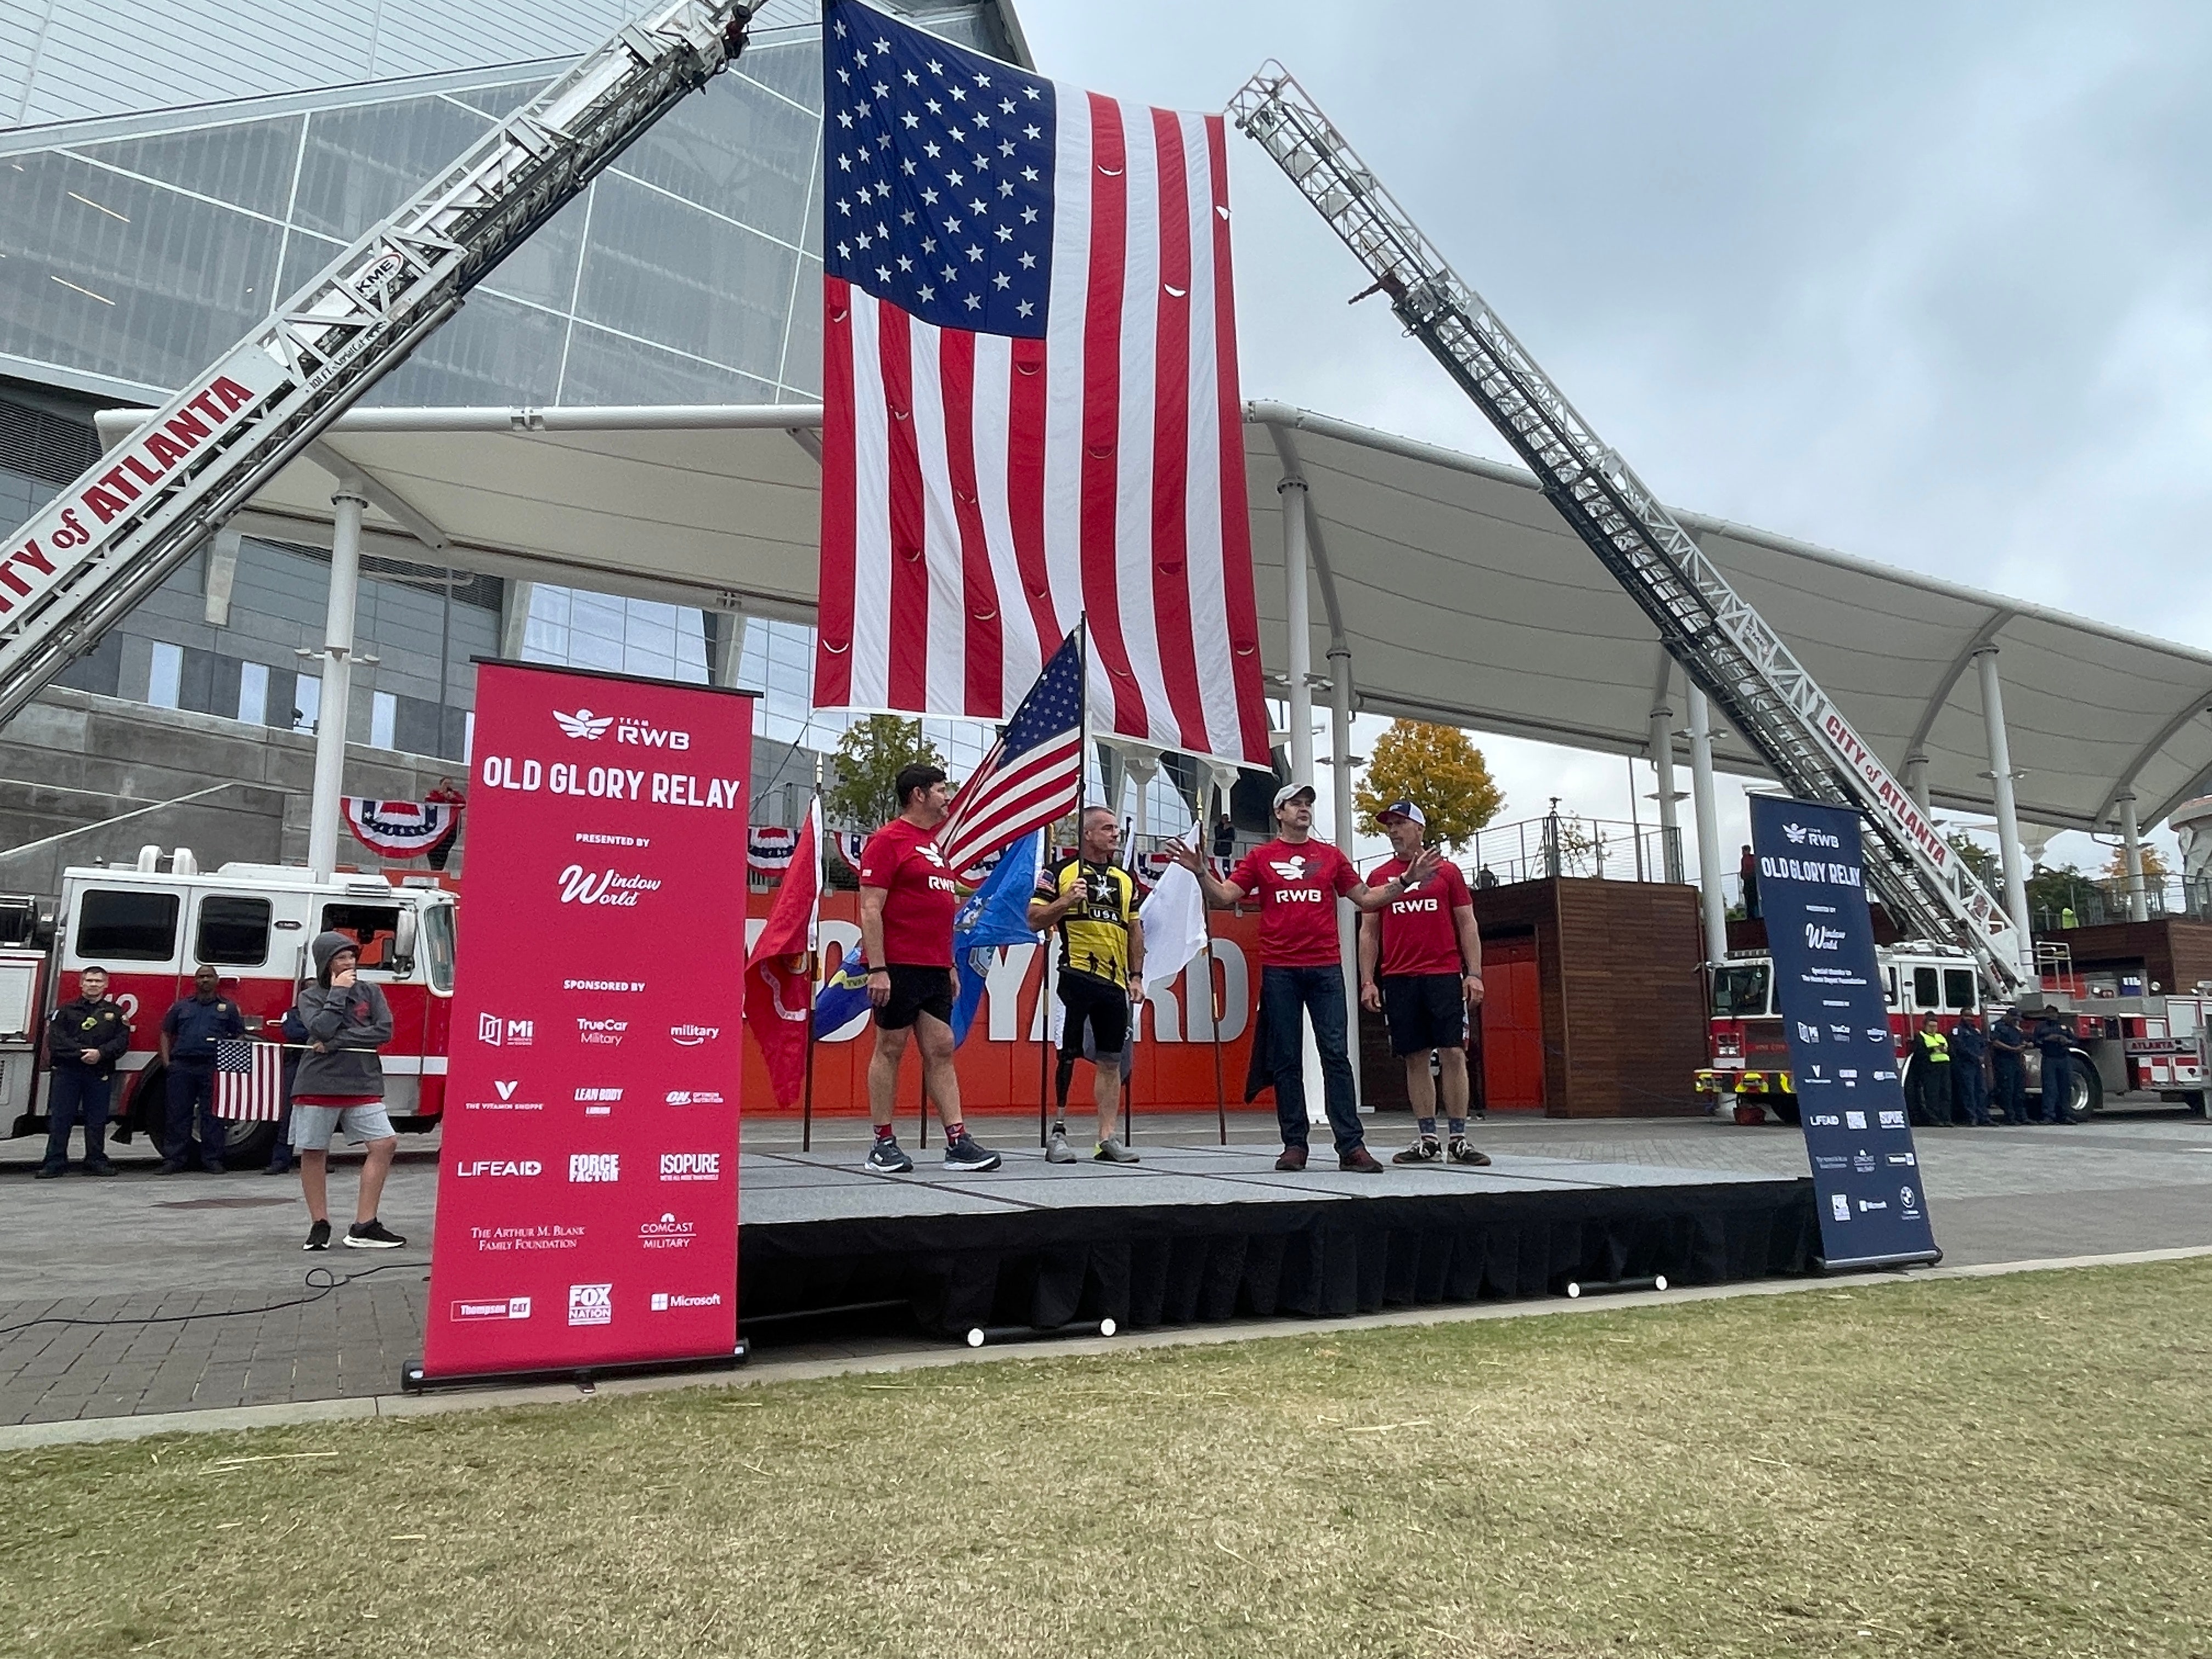 Veterans Honor: Old Glory Relay finishes 62-day journey in honor of nation's vets